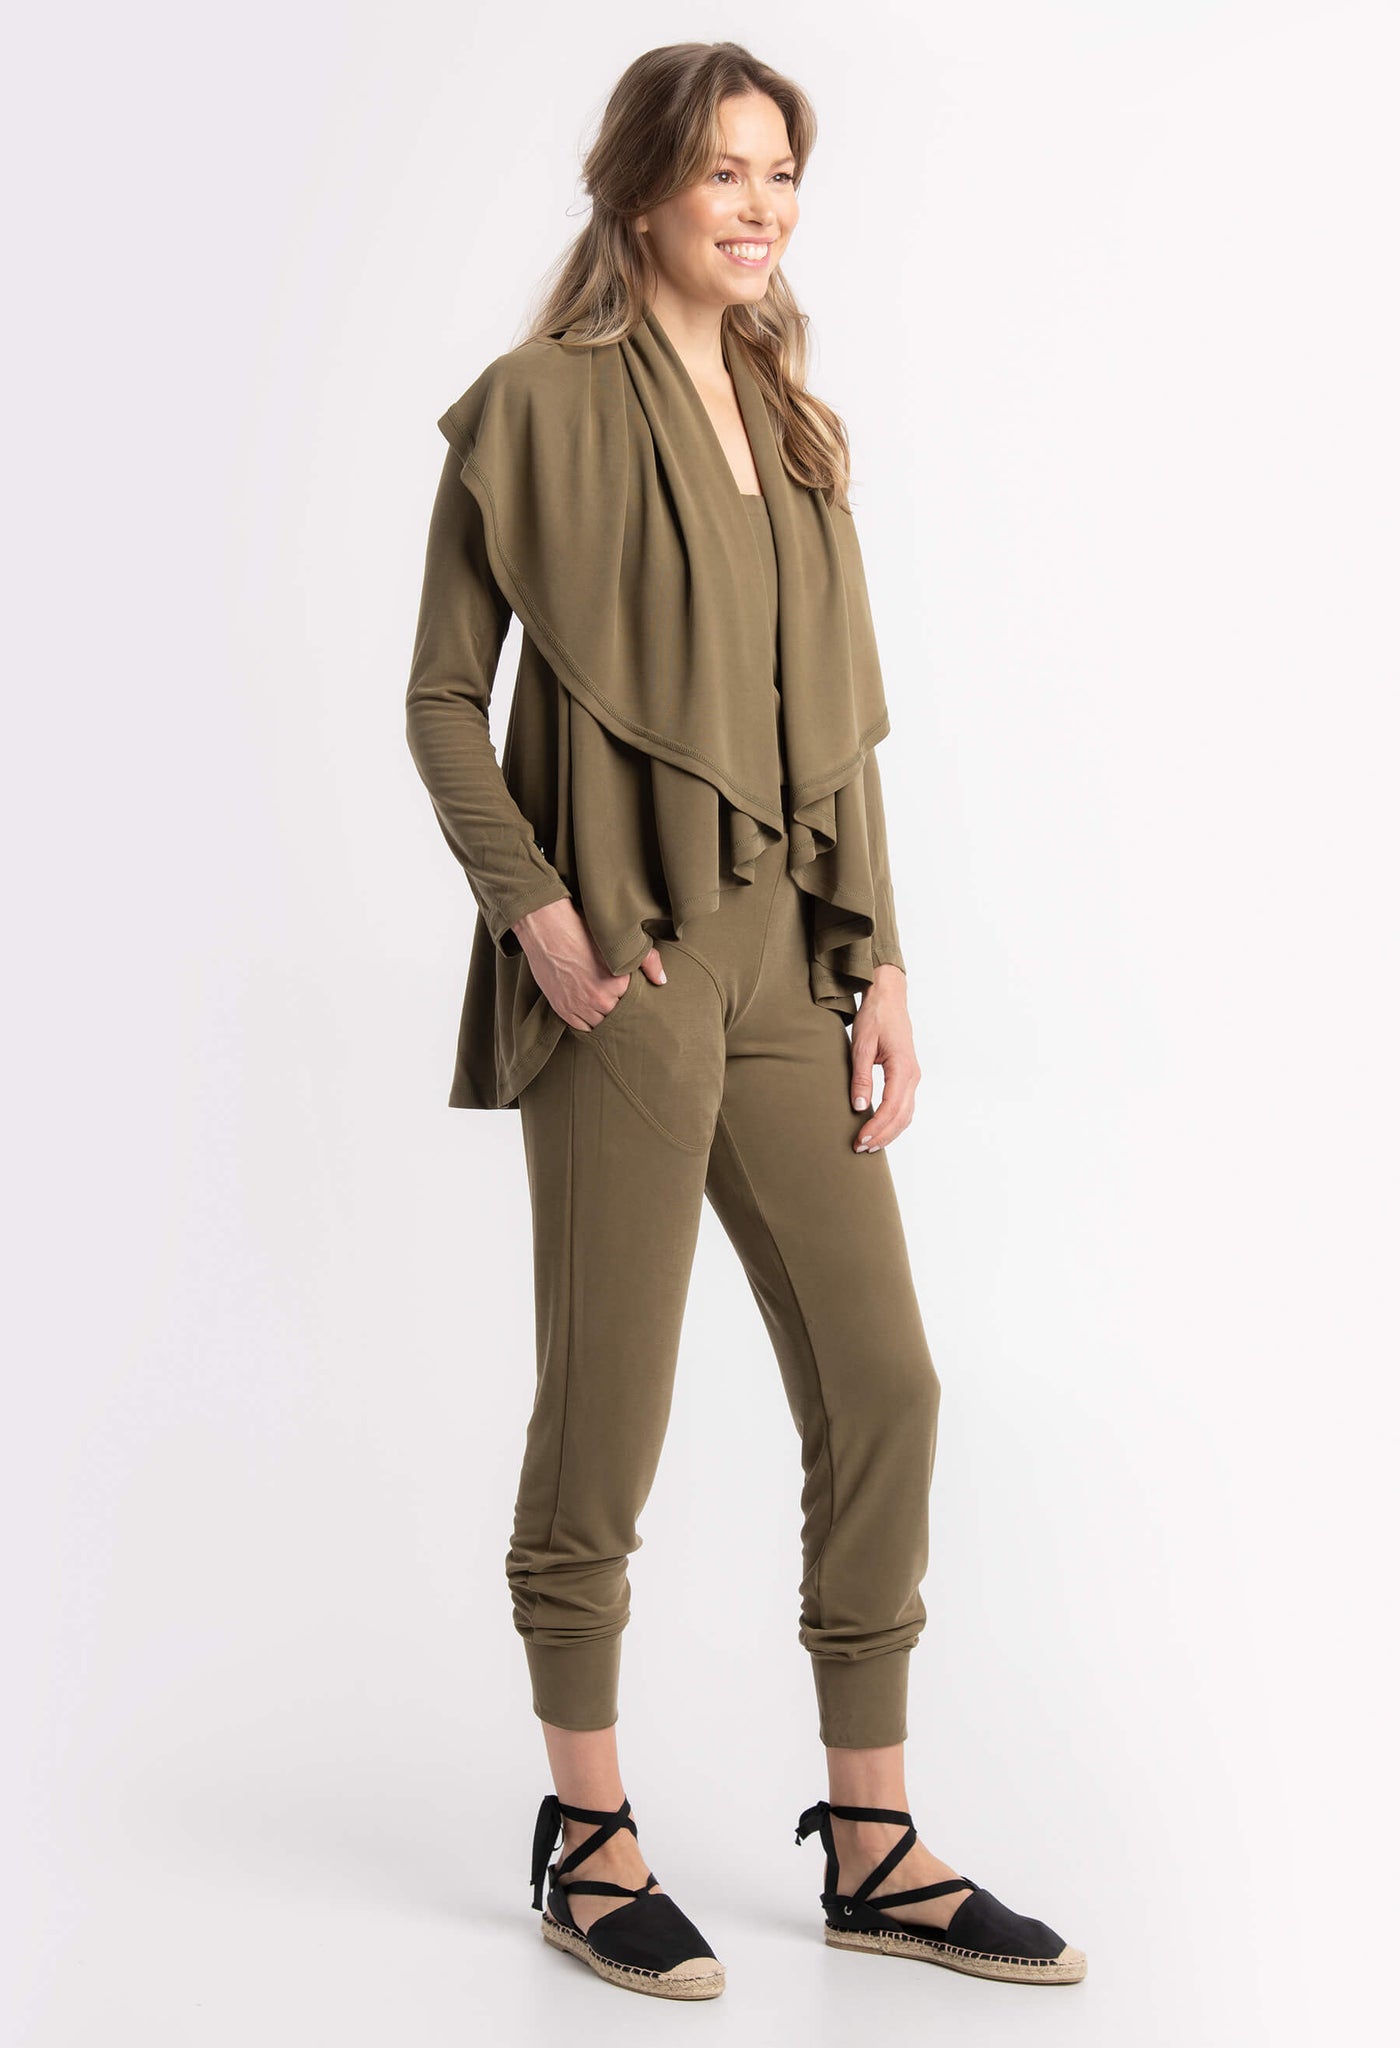 Comfortable semi-fitted pants - Jacinthe - Travel Collection